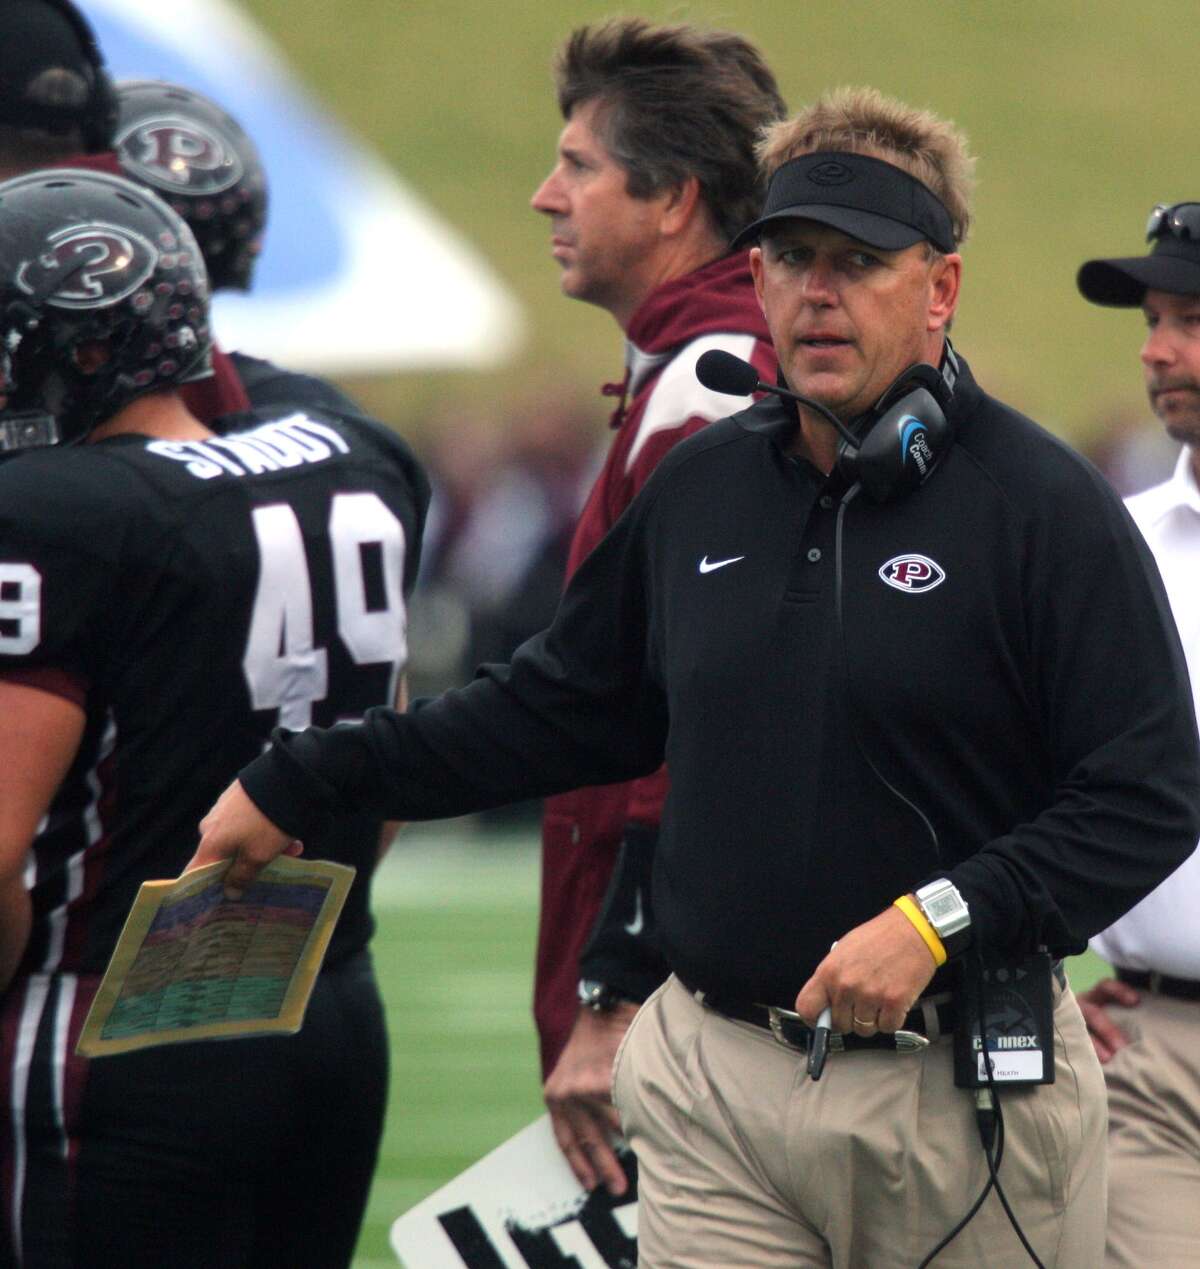 Tony Heath, who resigned Tuesday after 20 years as Pearland's football coach, posted a 195-53 record, including the Class 6A state championship in 2010.